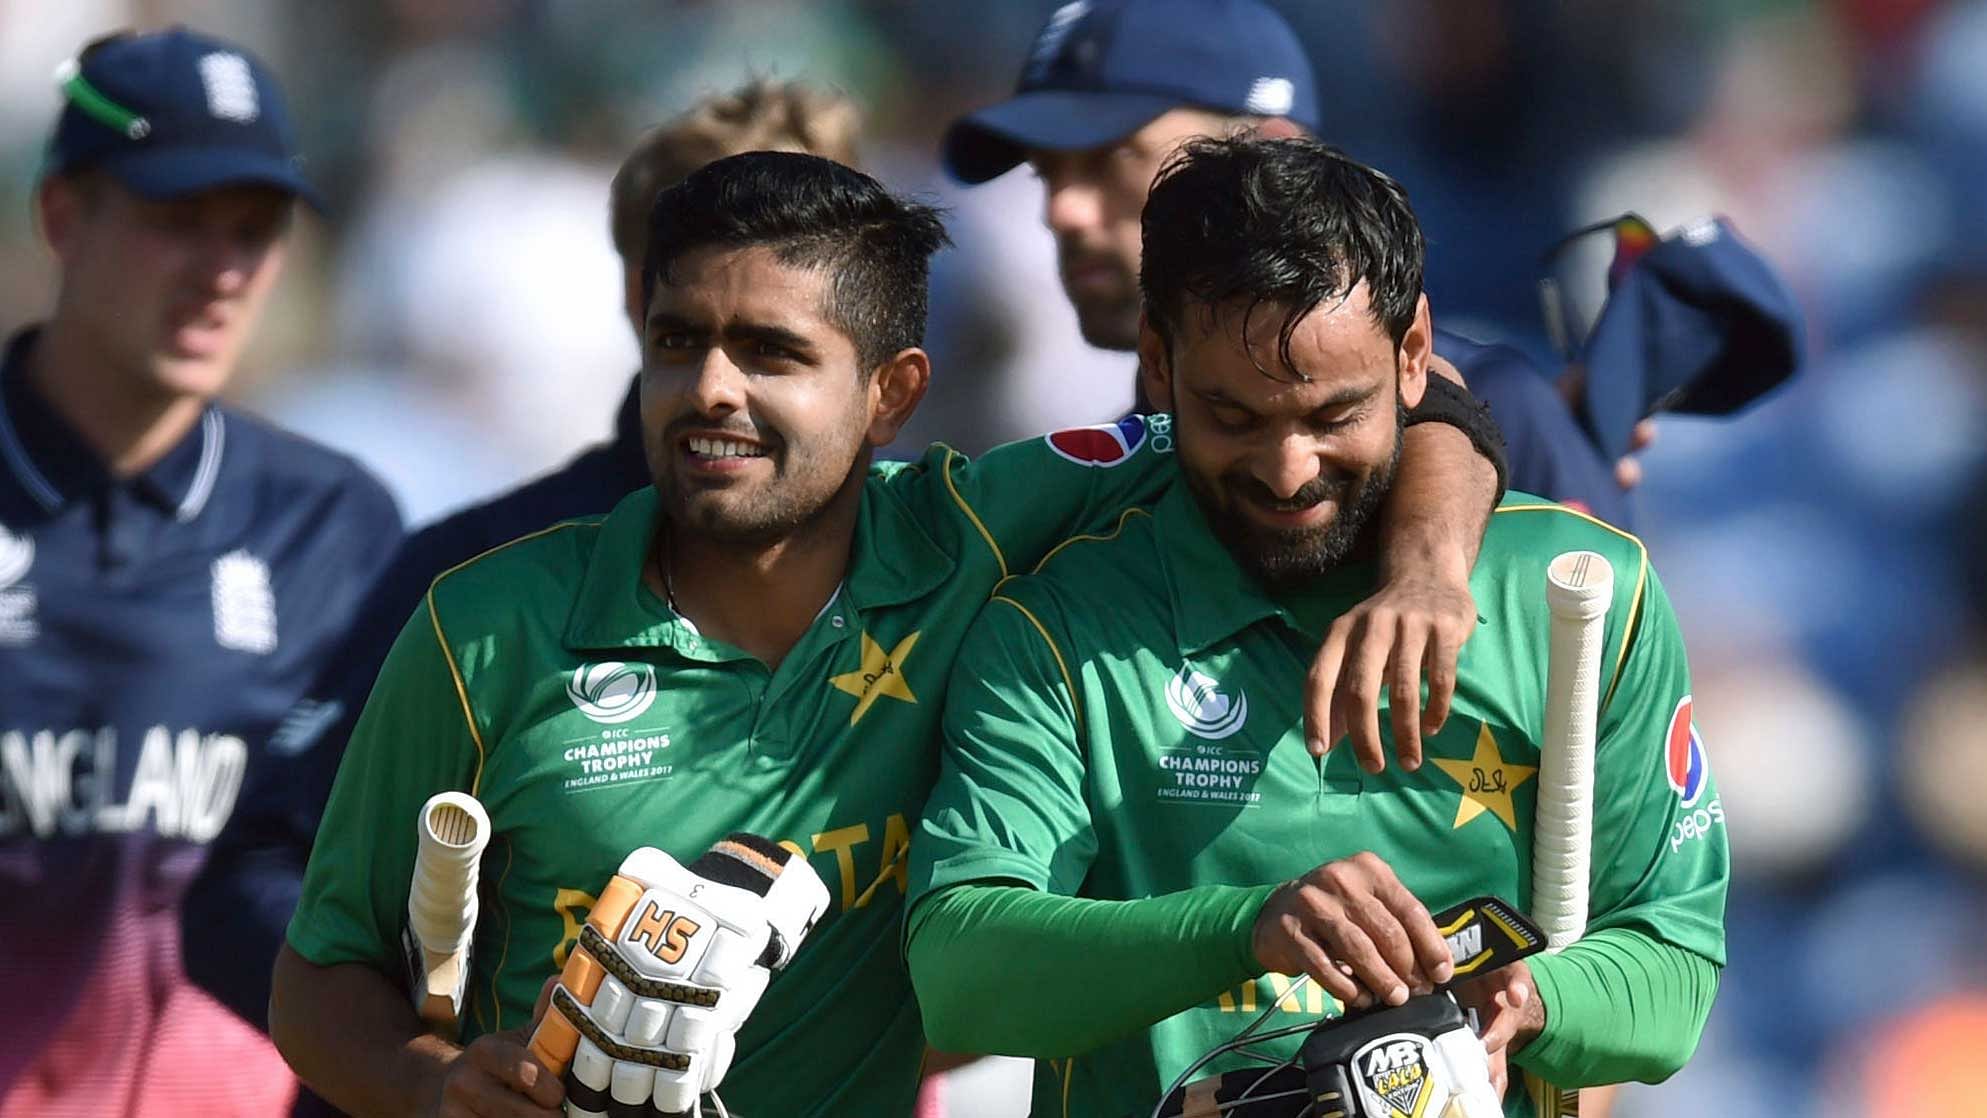 Pakistan’s Babar Azam and Mohammad Hafeez celebrate victory after the ICC Champions Trophy, semi-final match at the Cardiff Wales Stadium. (Photo: AP)